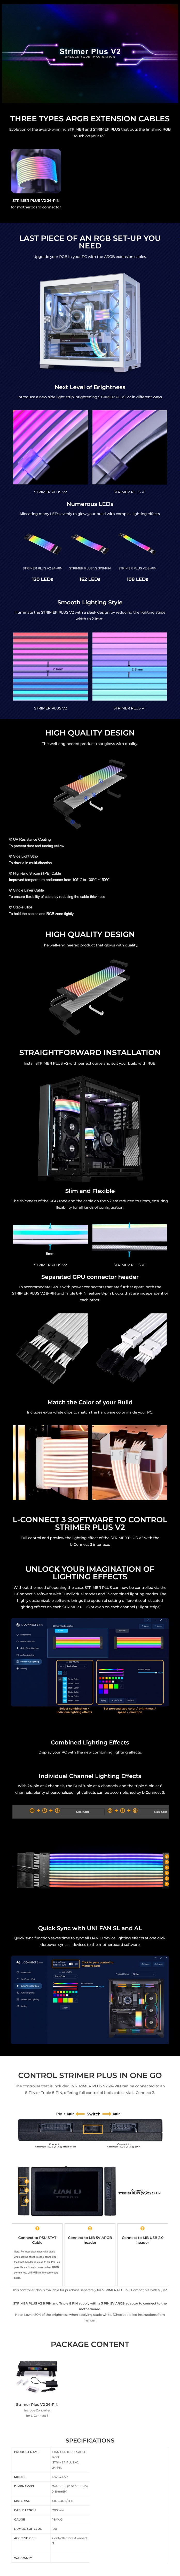 A large marketing image providing additional information about the product Lian Li Strimer Plus V2 24-Pin ATX ARGB LED Extension Cable - Additional alt info not provided